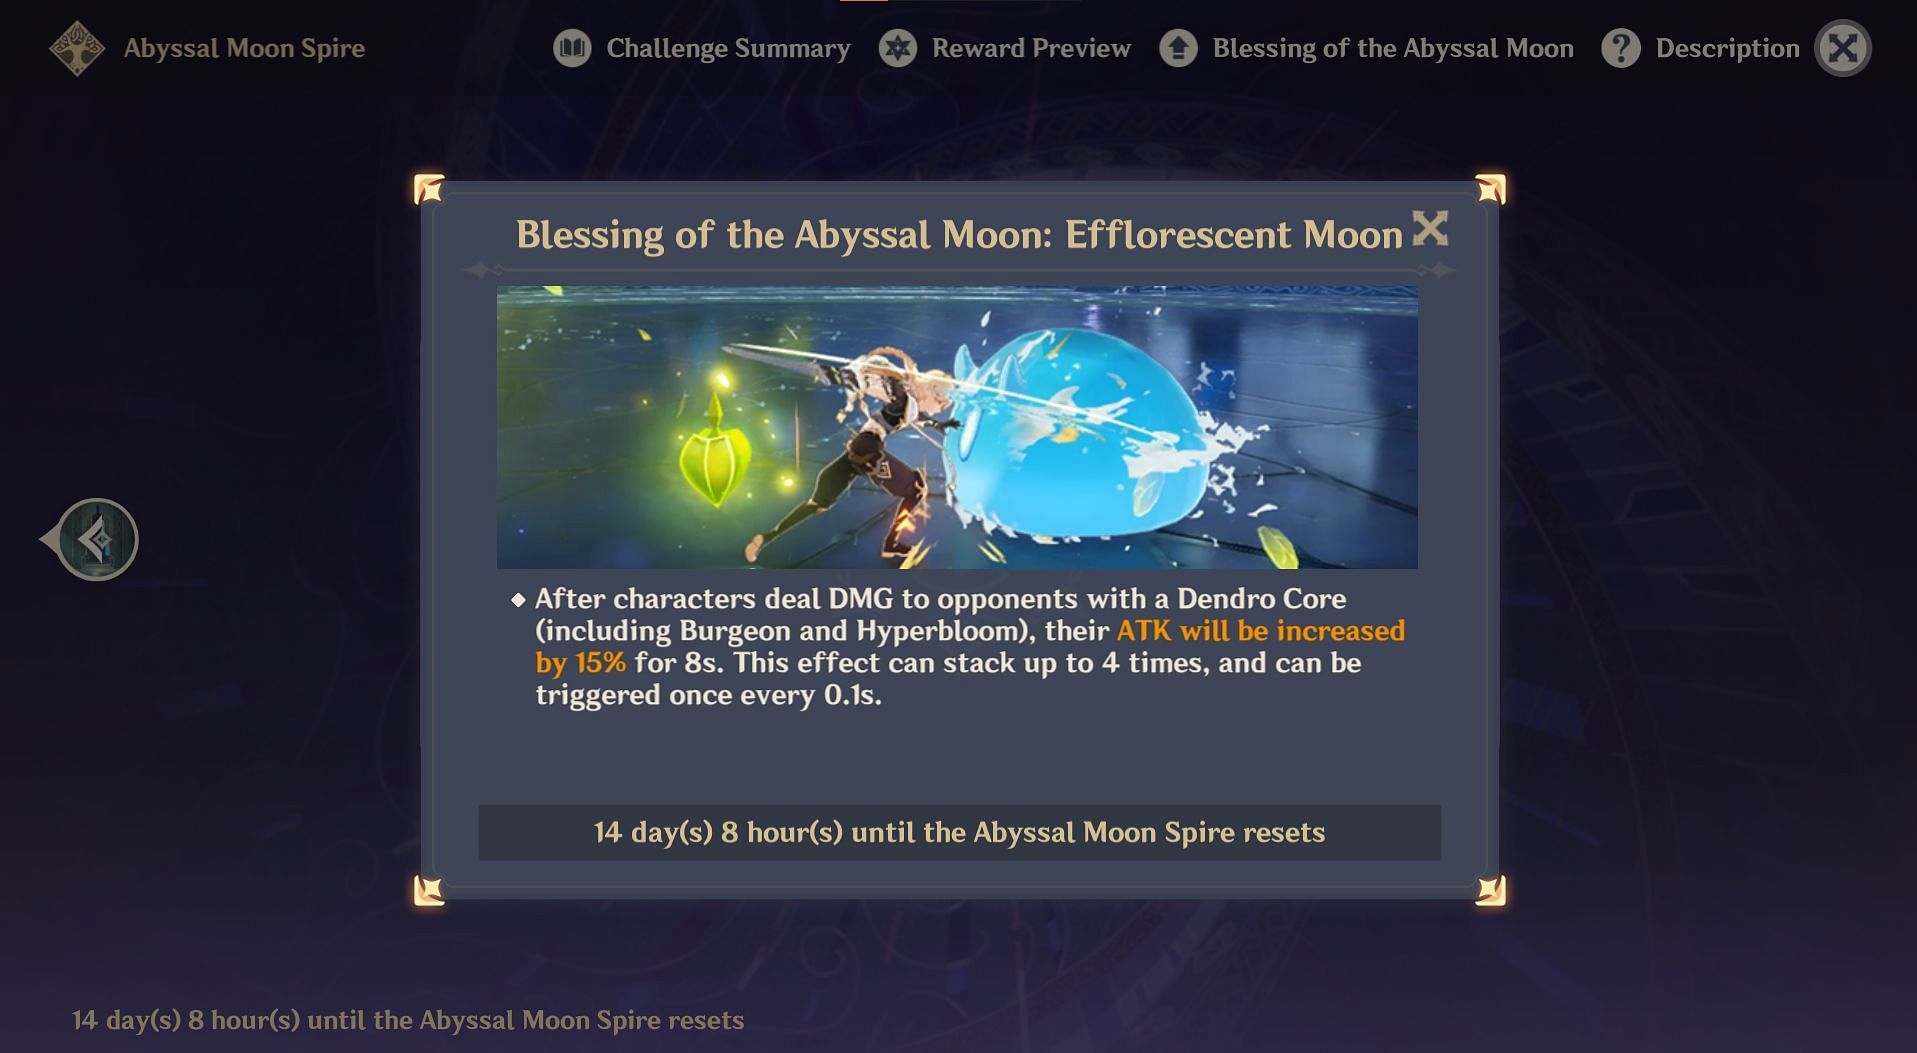 Current Blessing of the Abyssal Moon (Image via HoYoverse)